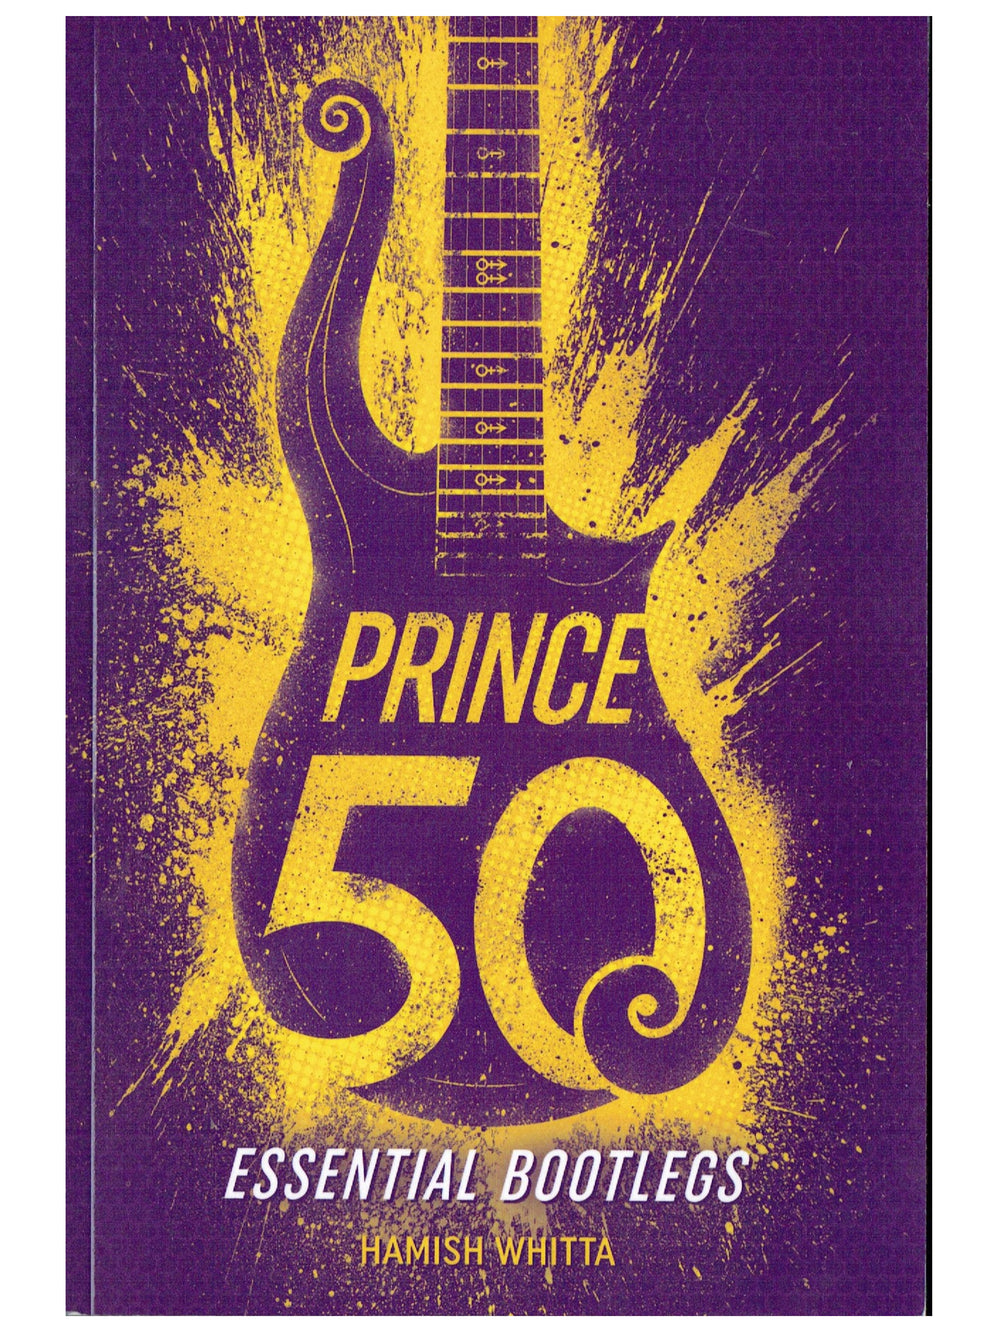 Prince 50 Essential Softback Book Hamish Whitta MINT AS NEW